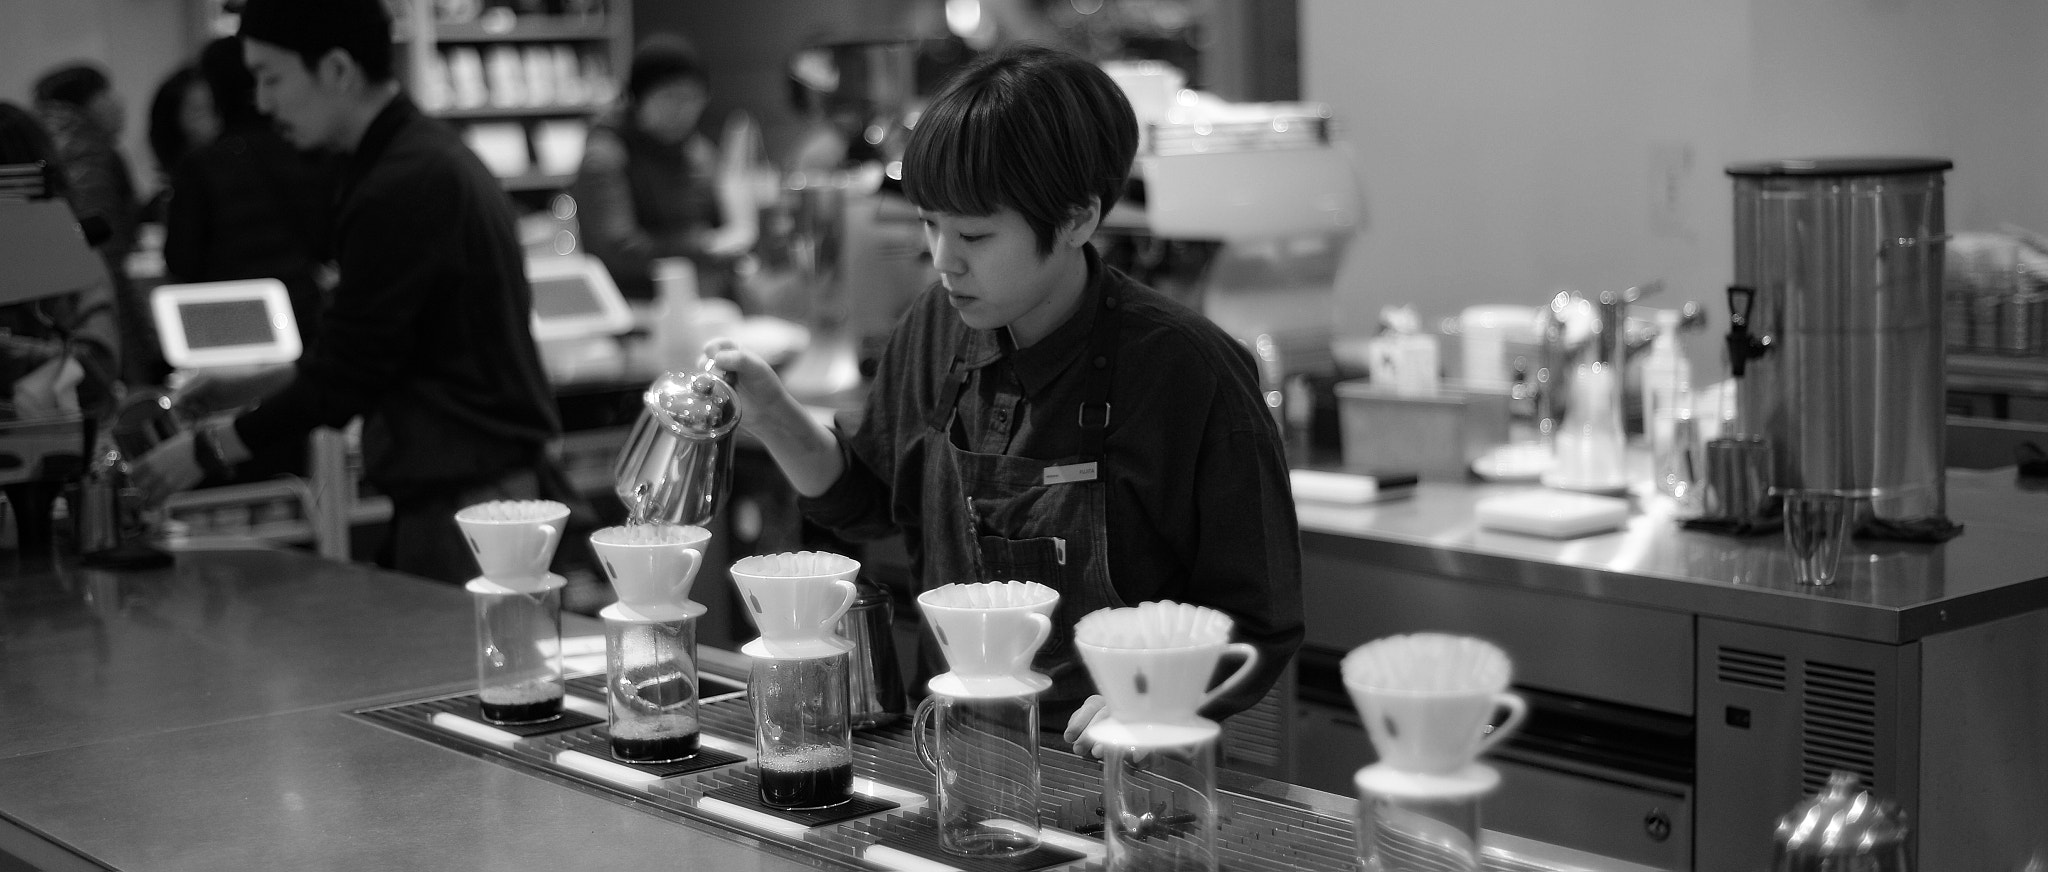 ZEISS Planar T* 50mm F1.4 sample photo. Cafe photography